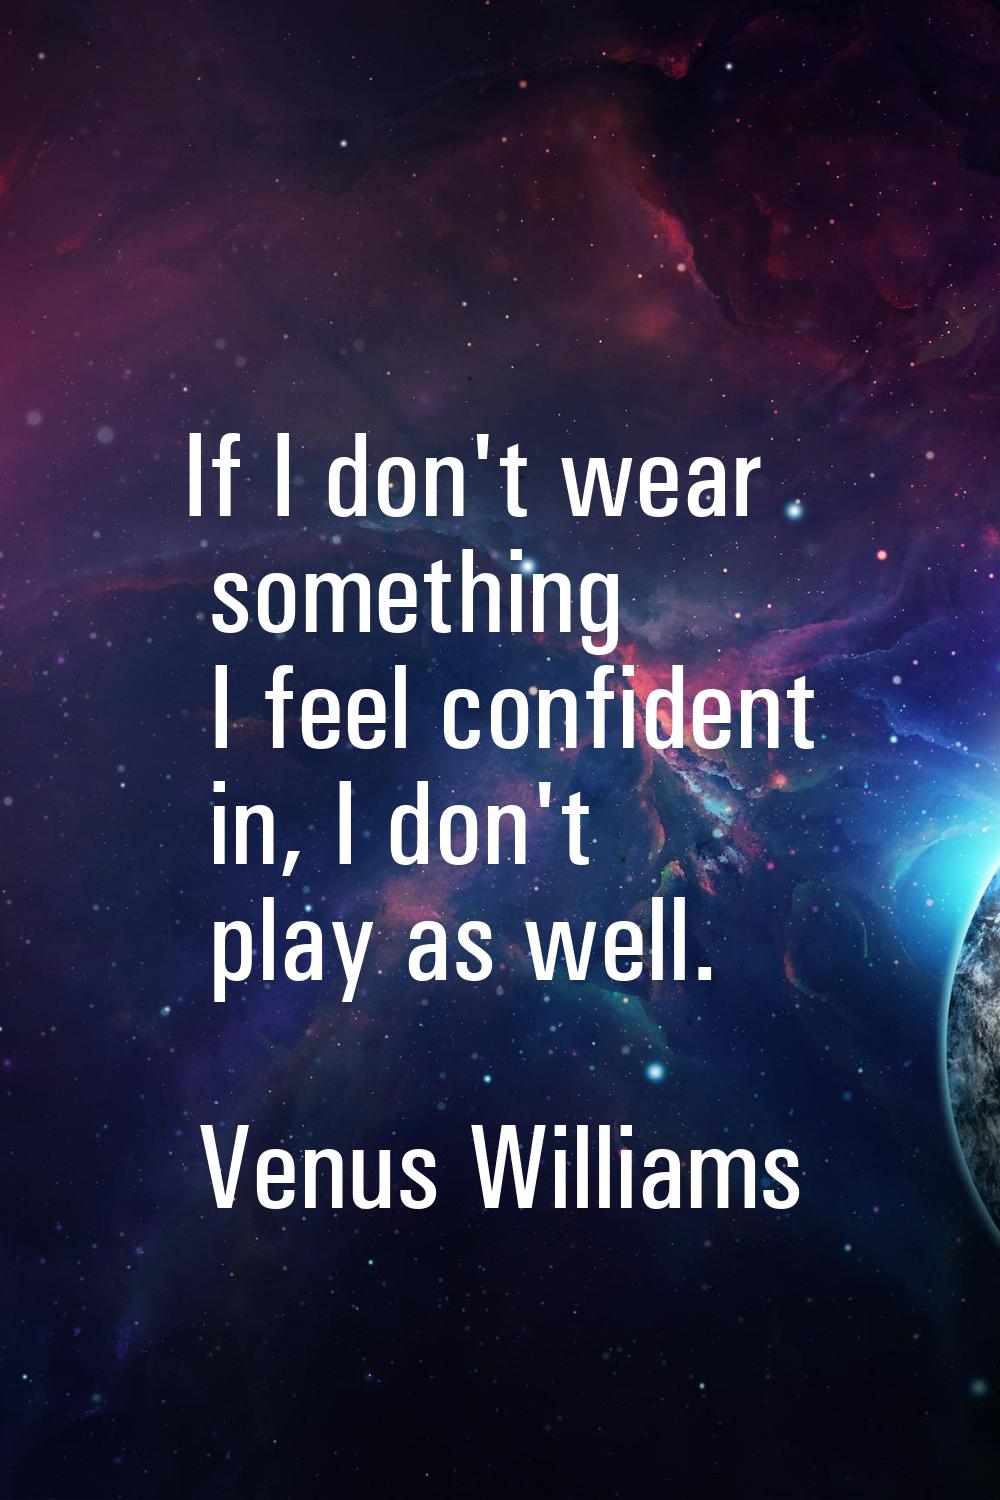 If I don't wear something I feel confident in, I don't play as well.